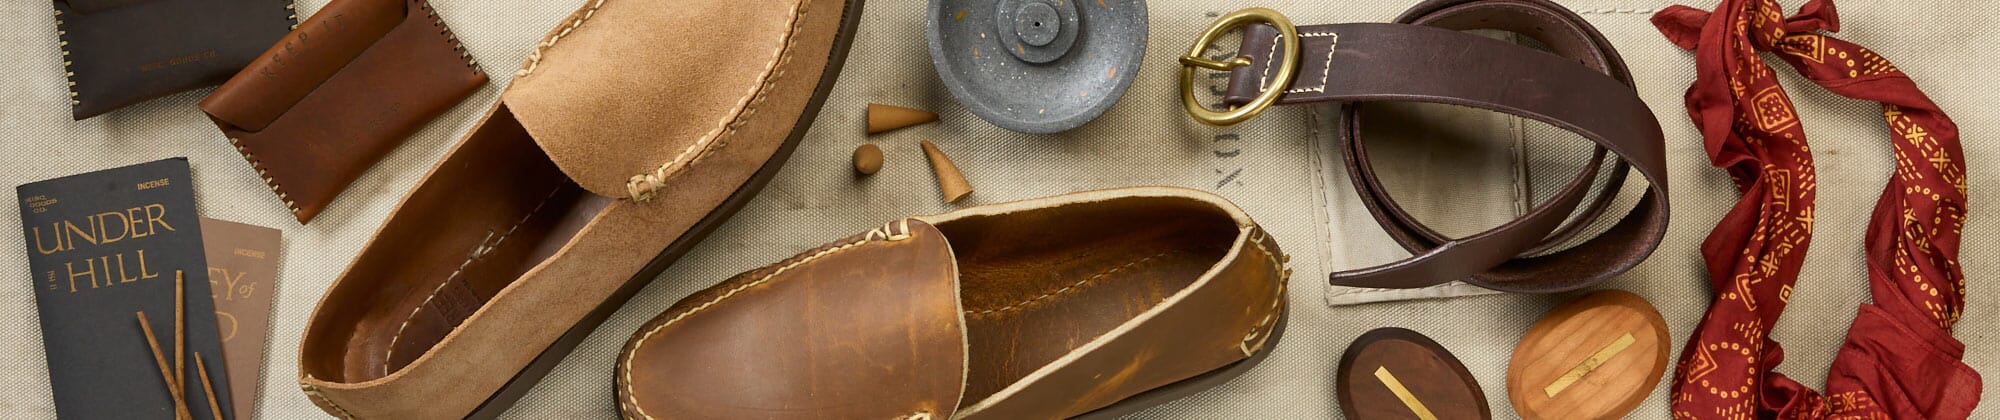 mens accessories; shoes, belts laying on a table